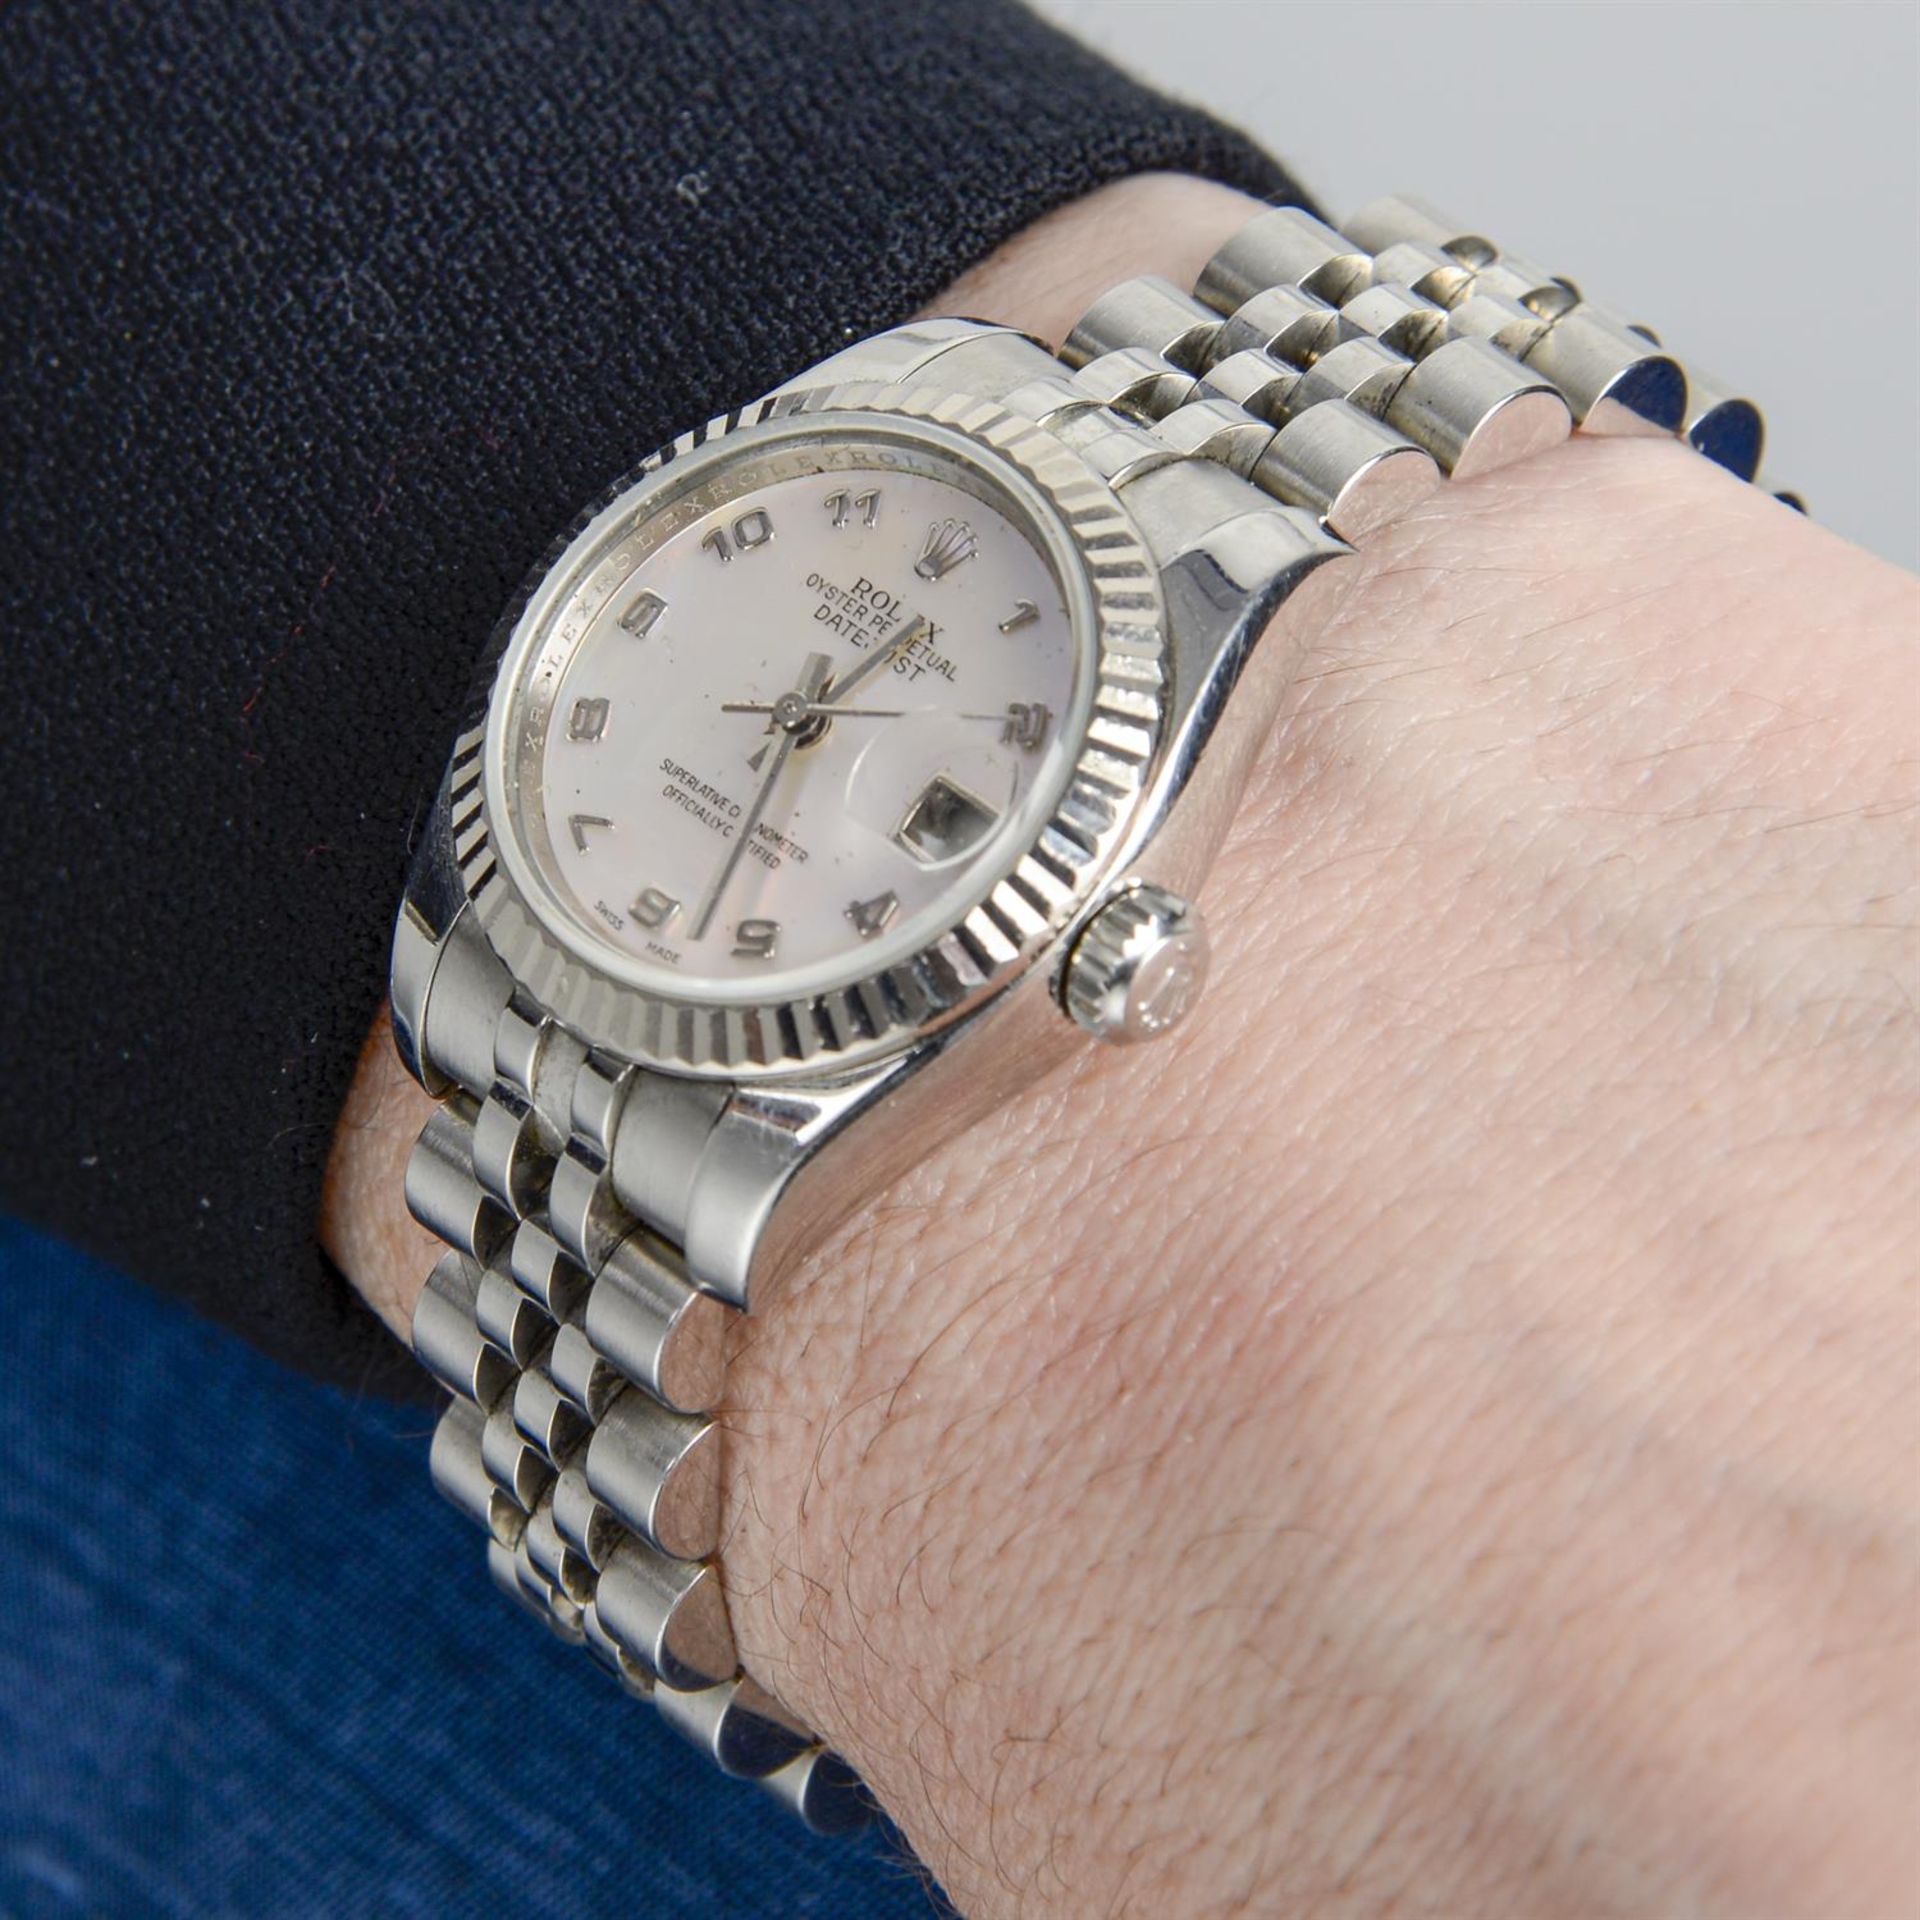 Rolex - an Oyster Perpetual Datejust watch, 26mm - Image 6 of 6